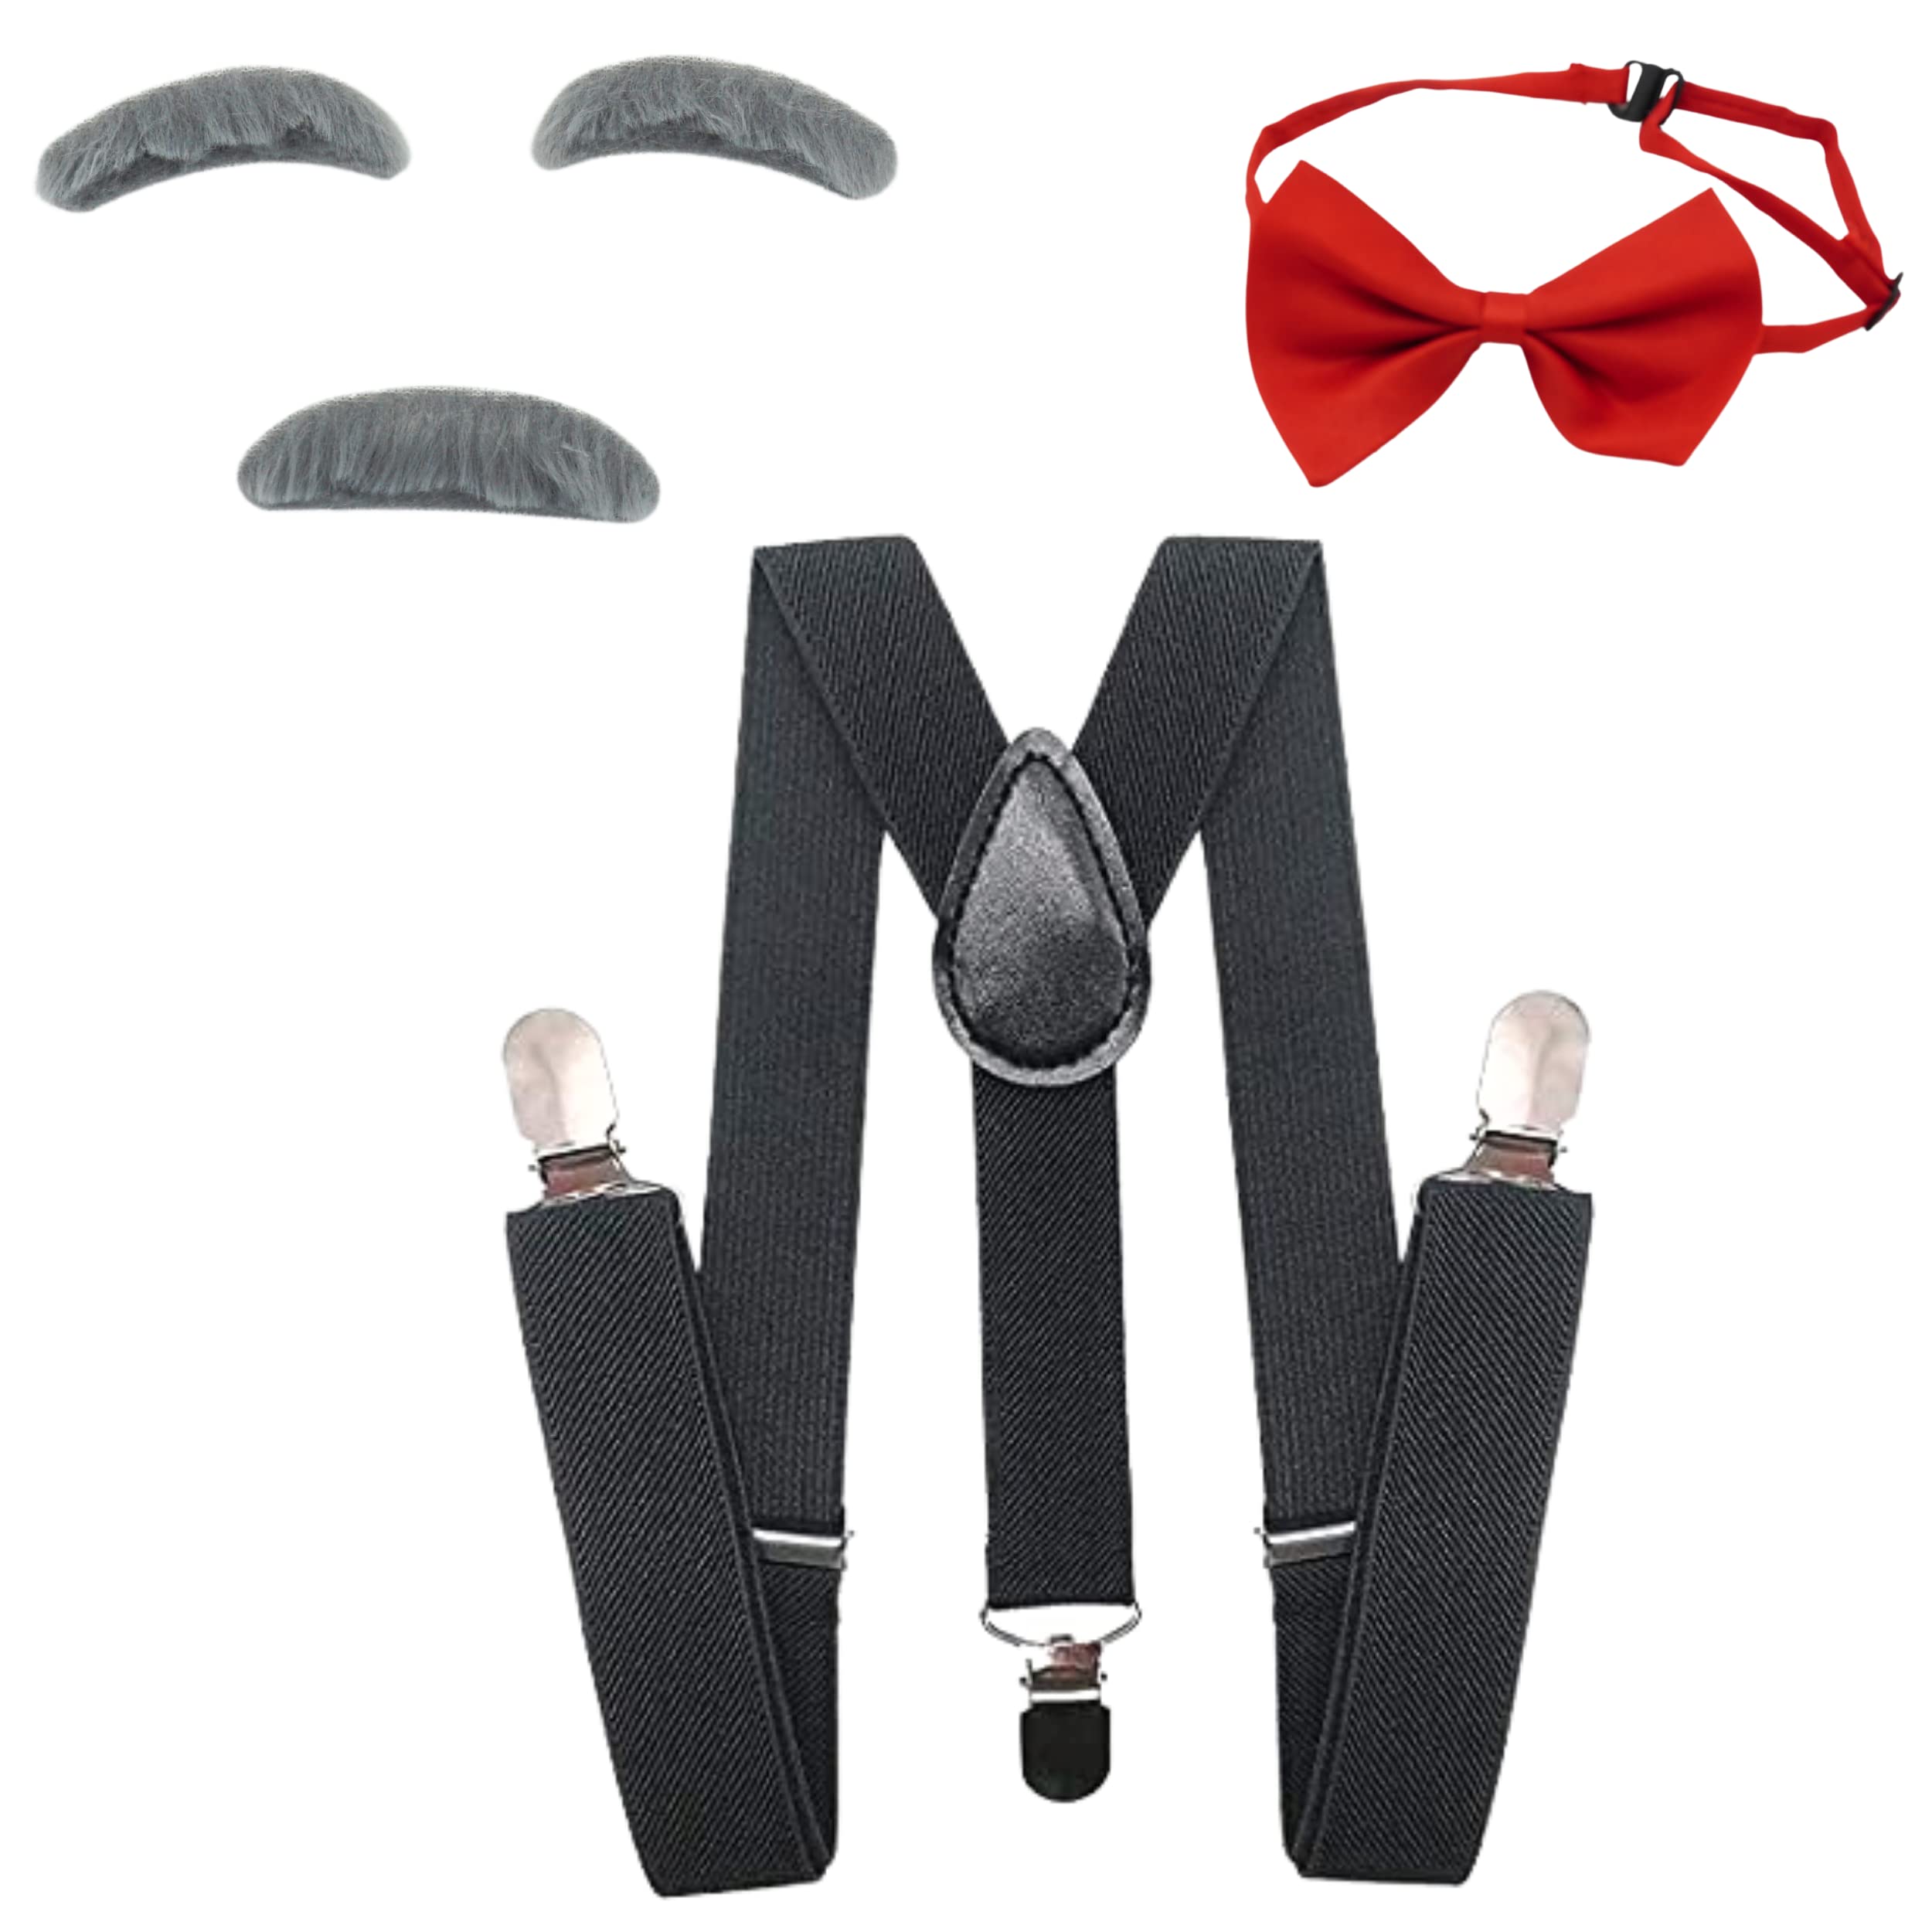 4E's Novelty Kids Old Man Costume Set - Includes Suspenders, Gray Fake Mustache & Eyebrows, Bow Tie - 100 Days of School Costume for Boys, Old Man Costume for Kids